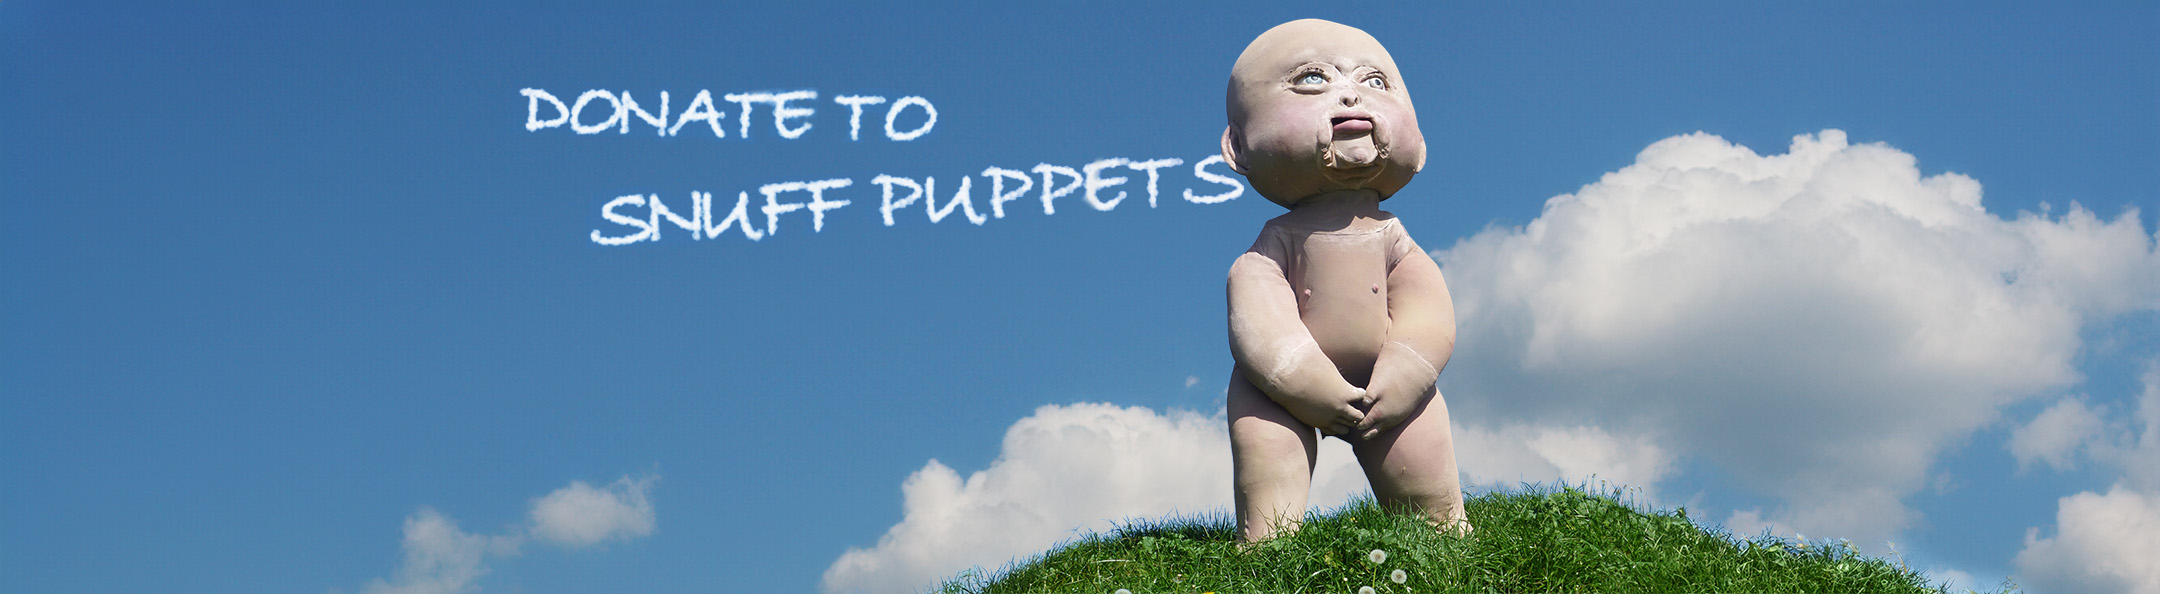 Photo of seven foot tall Baby puppet standing on grass on a hill